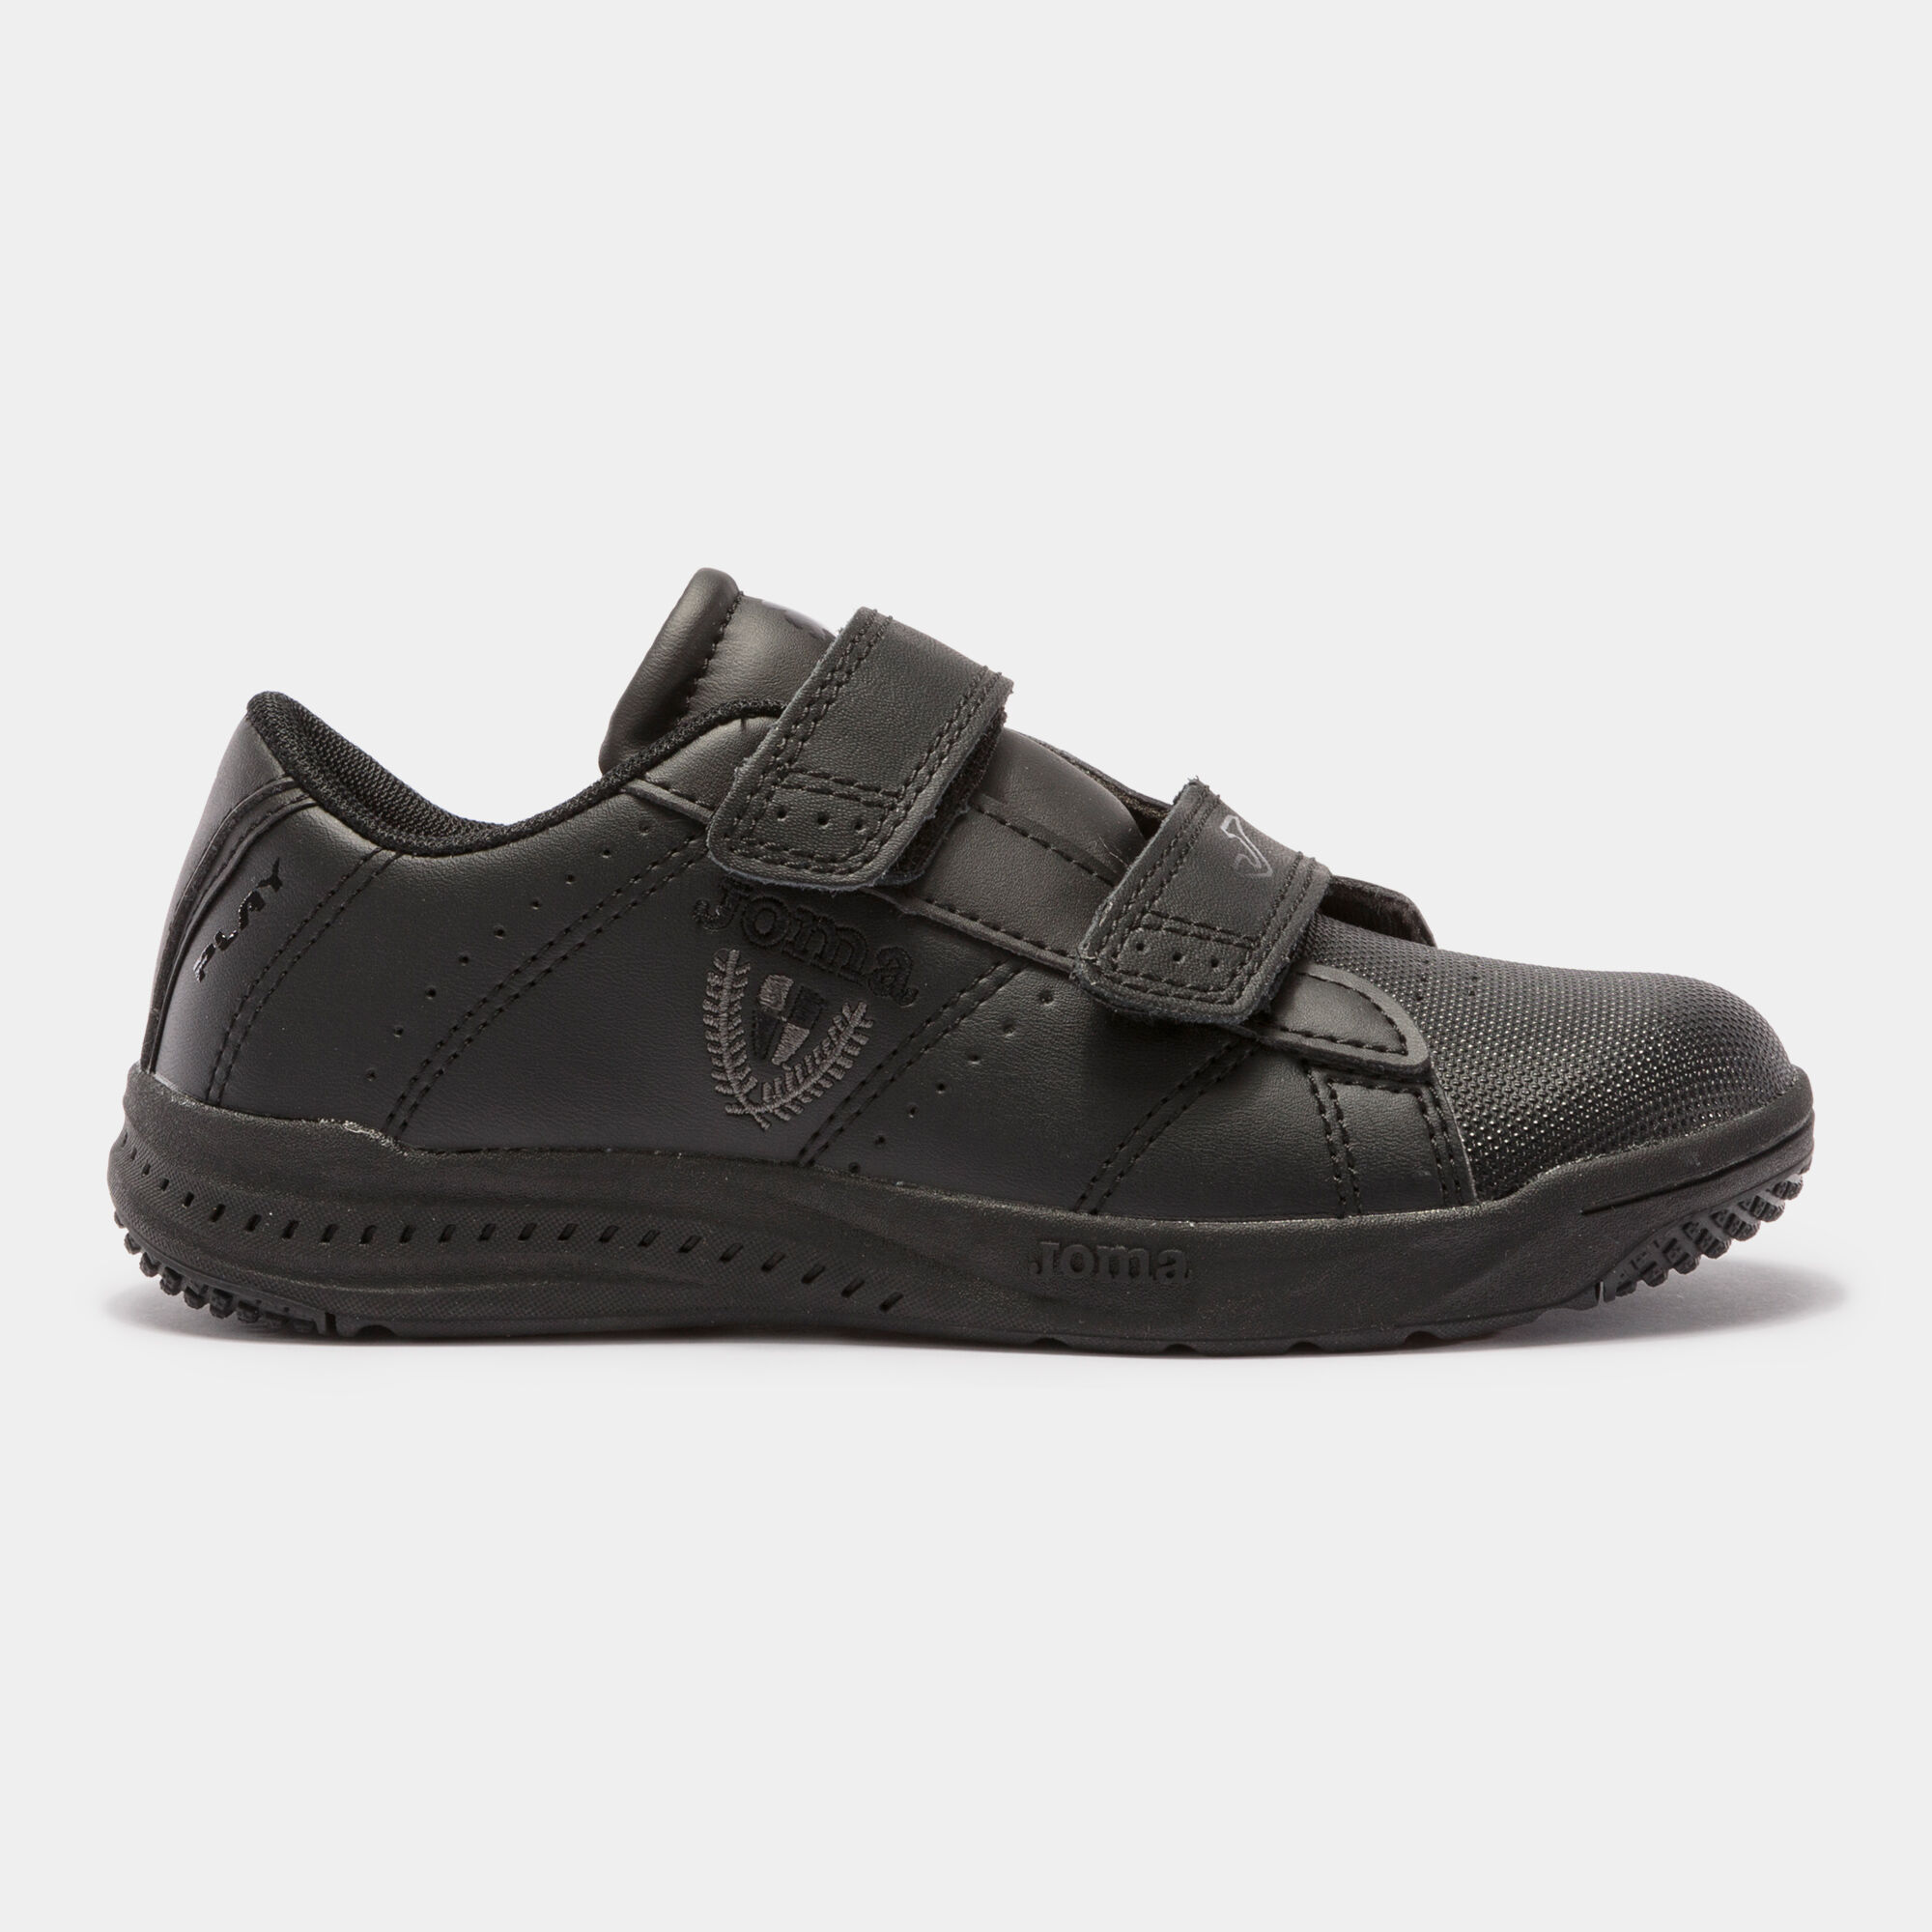 CHAUSSURES CASUAL PLAY 21 JUNIOR NOIR